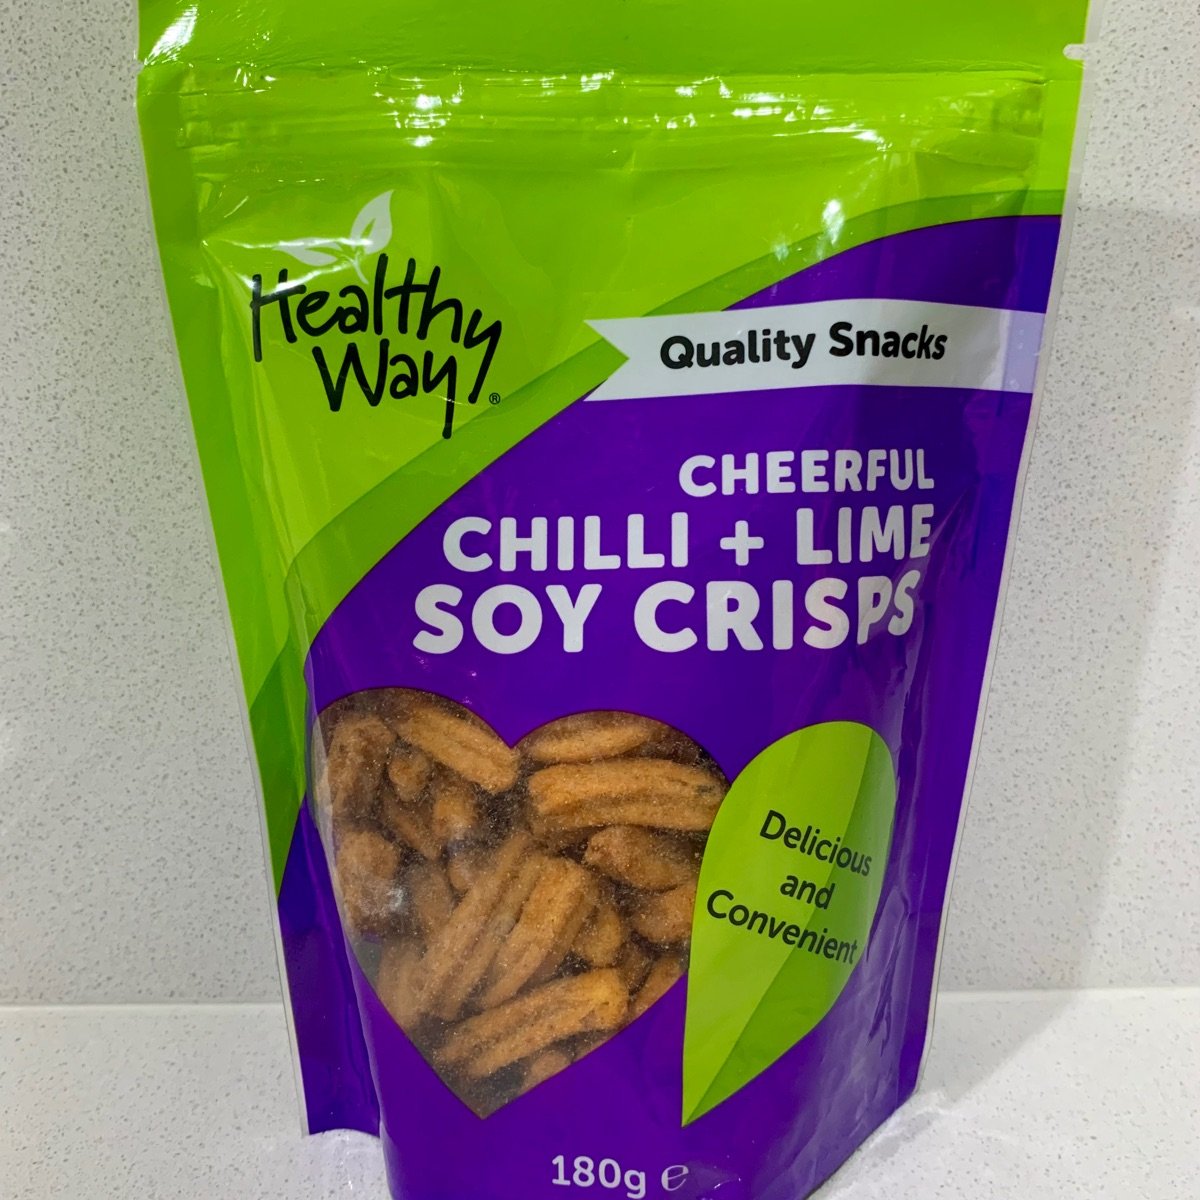 Healthy way Chilli + Lime Soy Crisps Reviews | abillion